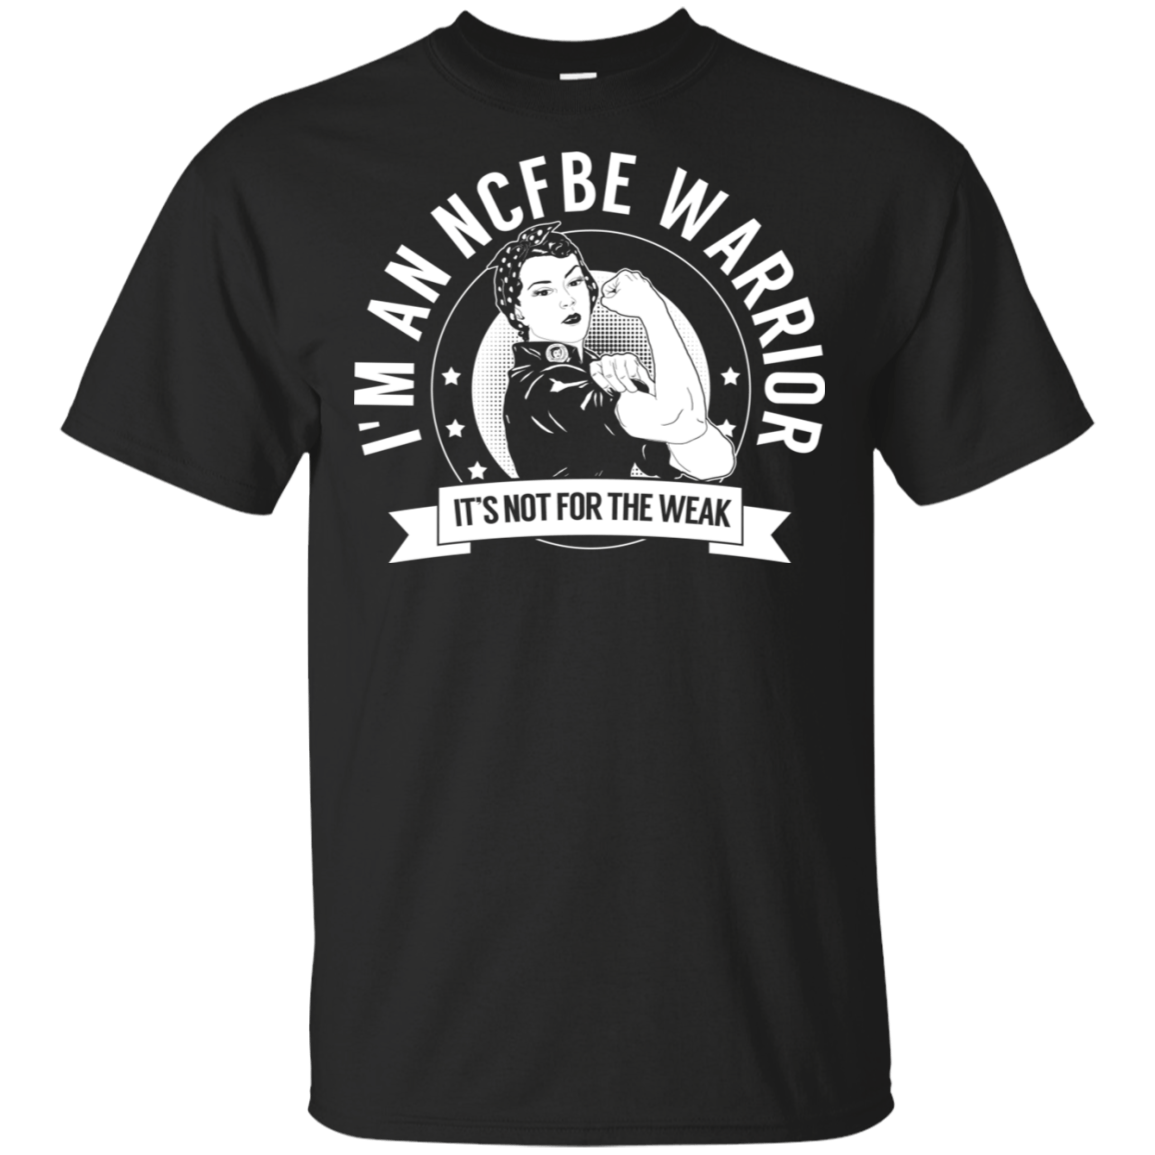 Non-cystic fibrosis bronchiectasis -  NCFBE Warrior NFTW Cotton Unisex Shirt - The Unchargeables